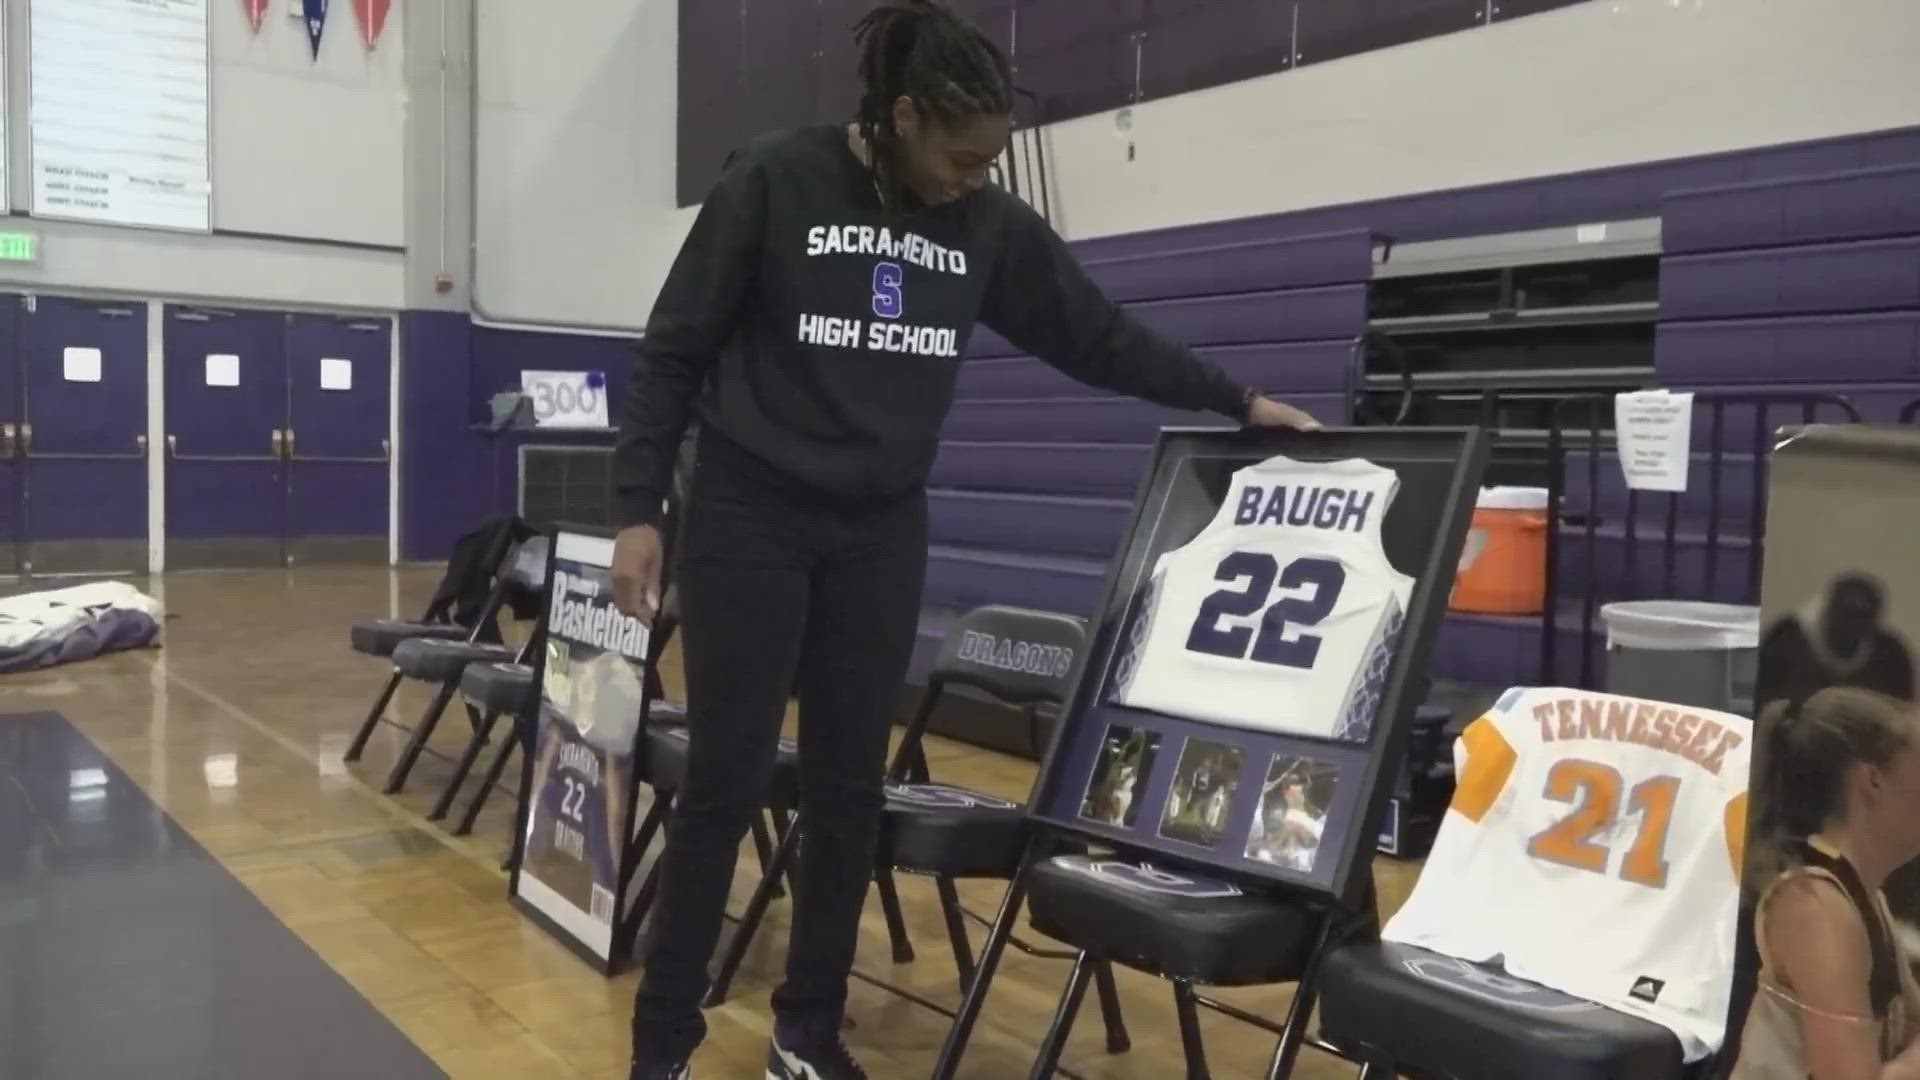 A former WNBA basketball player and alum of Sacramento High School by the name of Vicki Baugh will have her jersey retired Wednesday night.